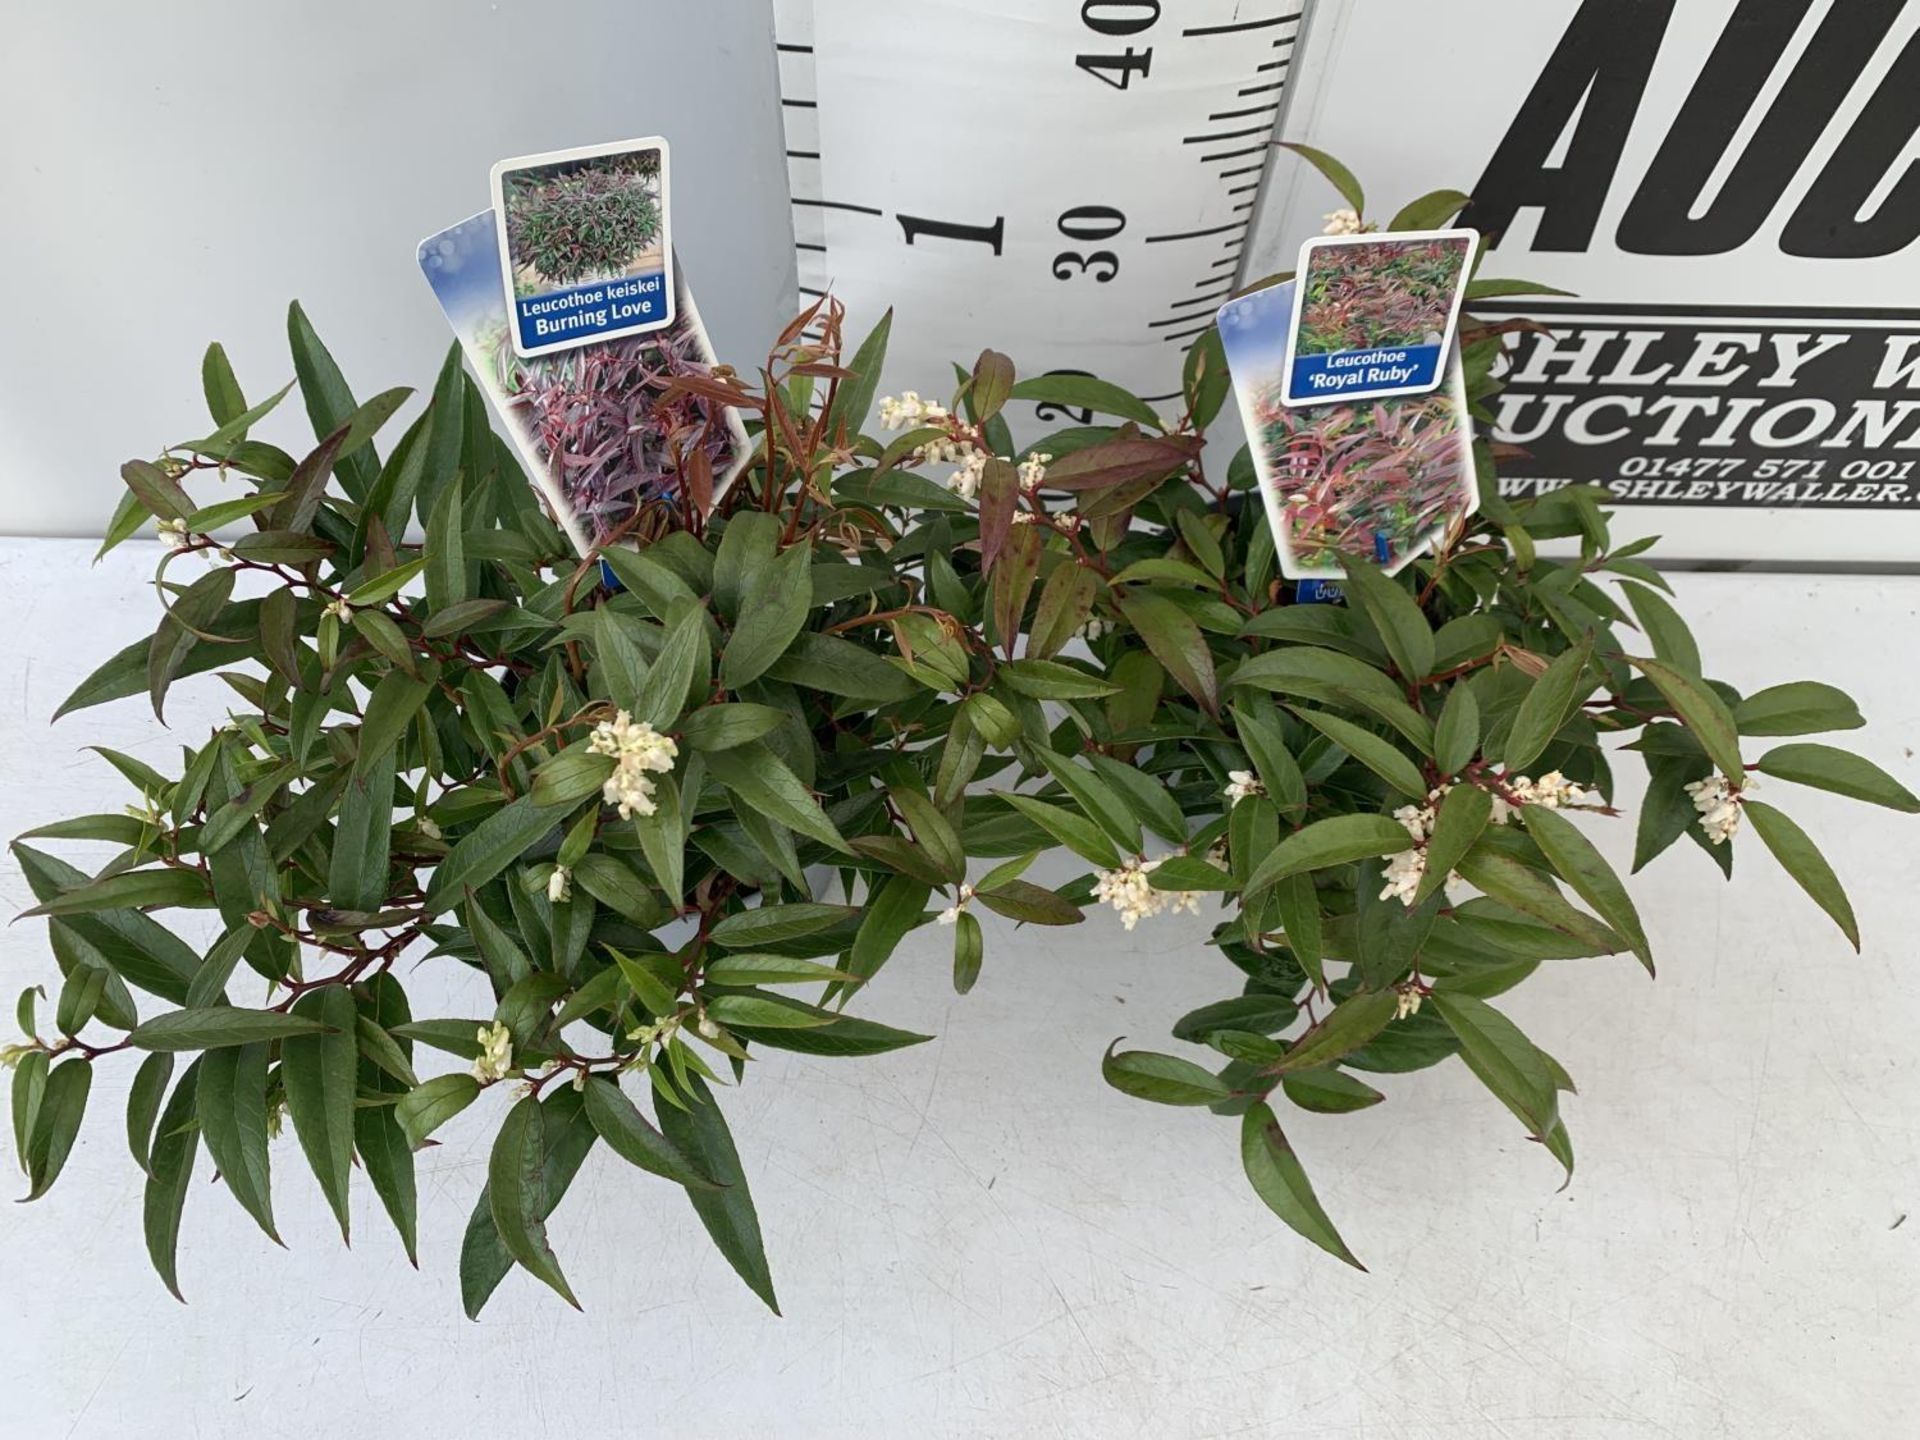 TWO LEUCOTHOE 'ROYAL RUBY' AND 'BURNING LOVE' IN 2 LTR POTS 35CM TALL PLUS VAT TO BE SOLD FOR THE - Image 4 of 12